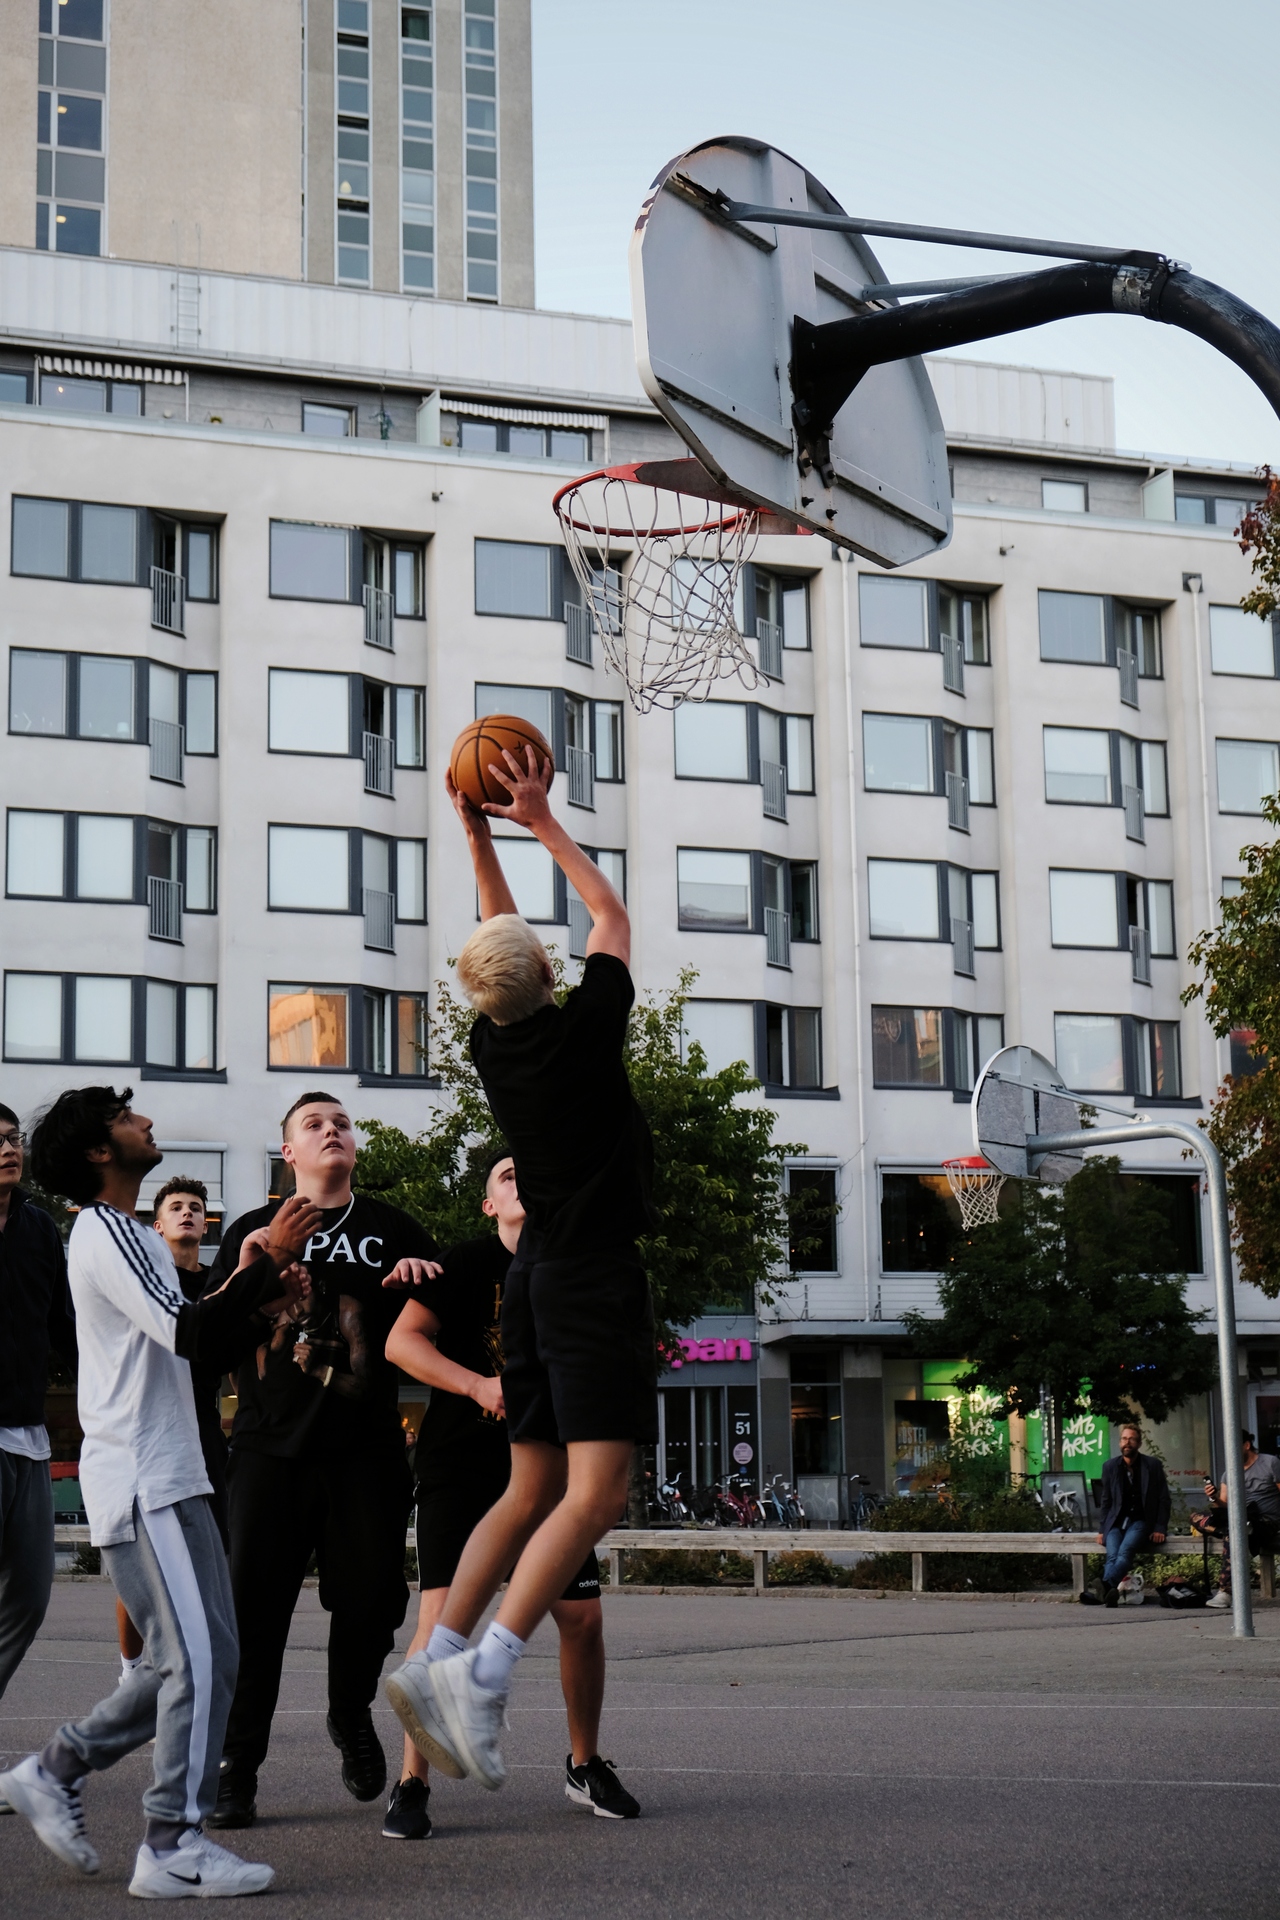 A few teens playing basketball on the island Södermalm in Stockholm.